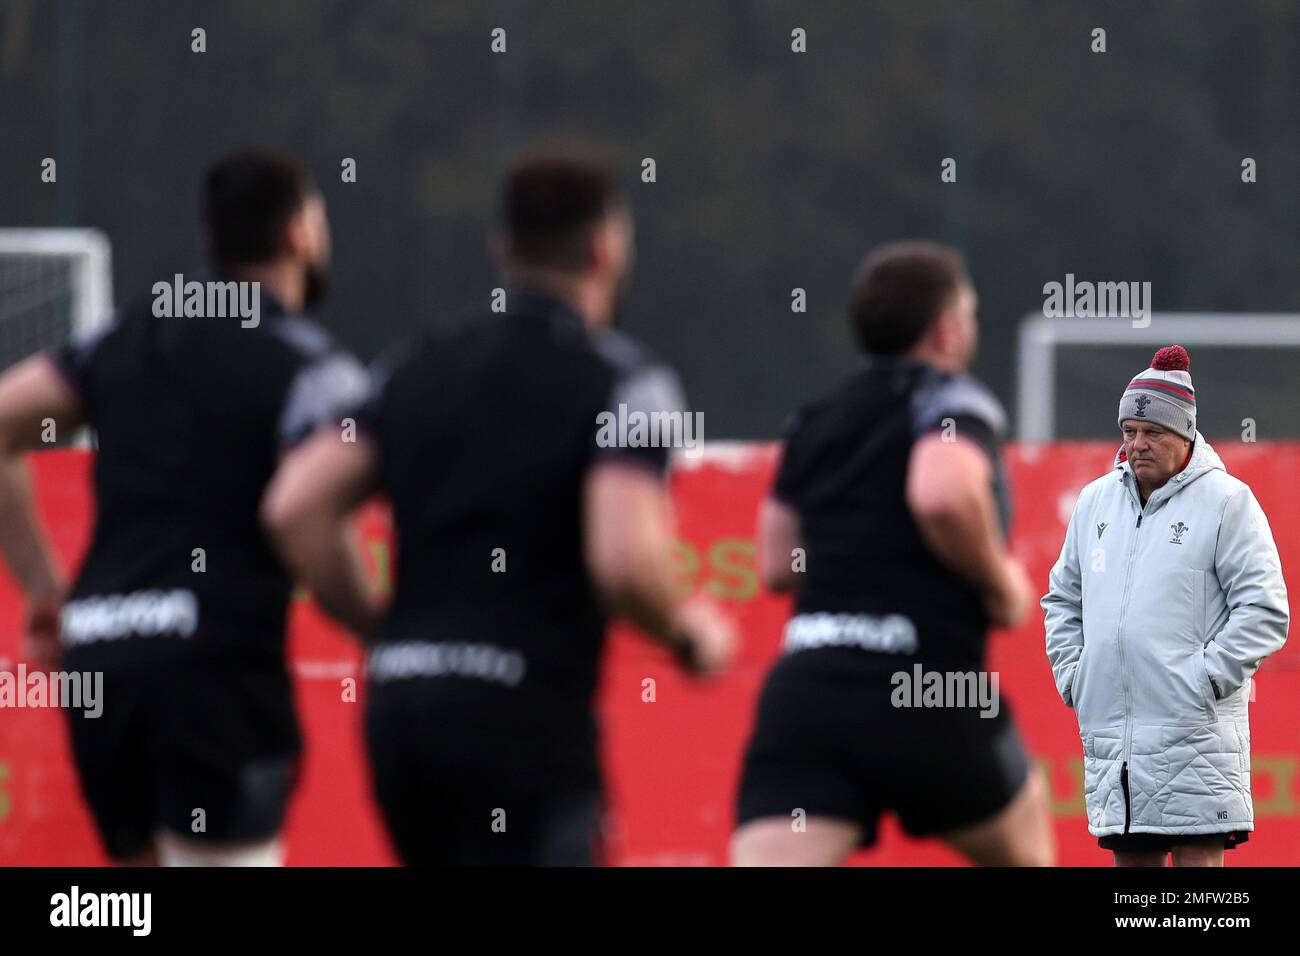 Cardiff, UK. 25th Jan, 2023. Warren Gatland, the head coach of Wales rugby team looks on during the Wales rugby training session, Vale of Glamorgan on Wednesday 25th January 2023. The team are preparing for this years Guinness Six nations championship . pic by Andrew Orchard/Andrew Orchard sports photography/ Alamy Live News Credit: Andrew Orchard sports photography/Alamy Live News Stock Photo